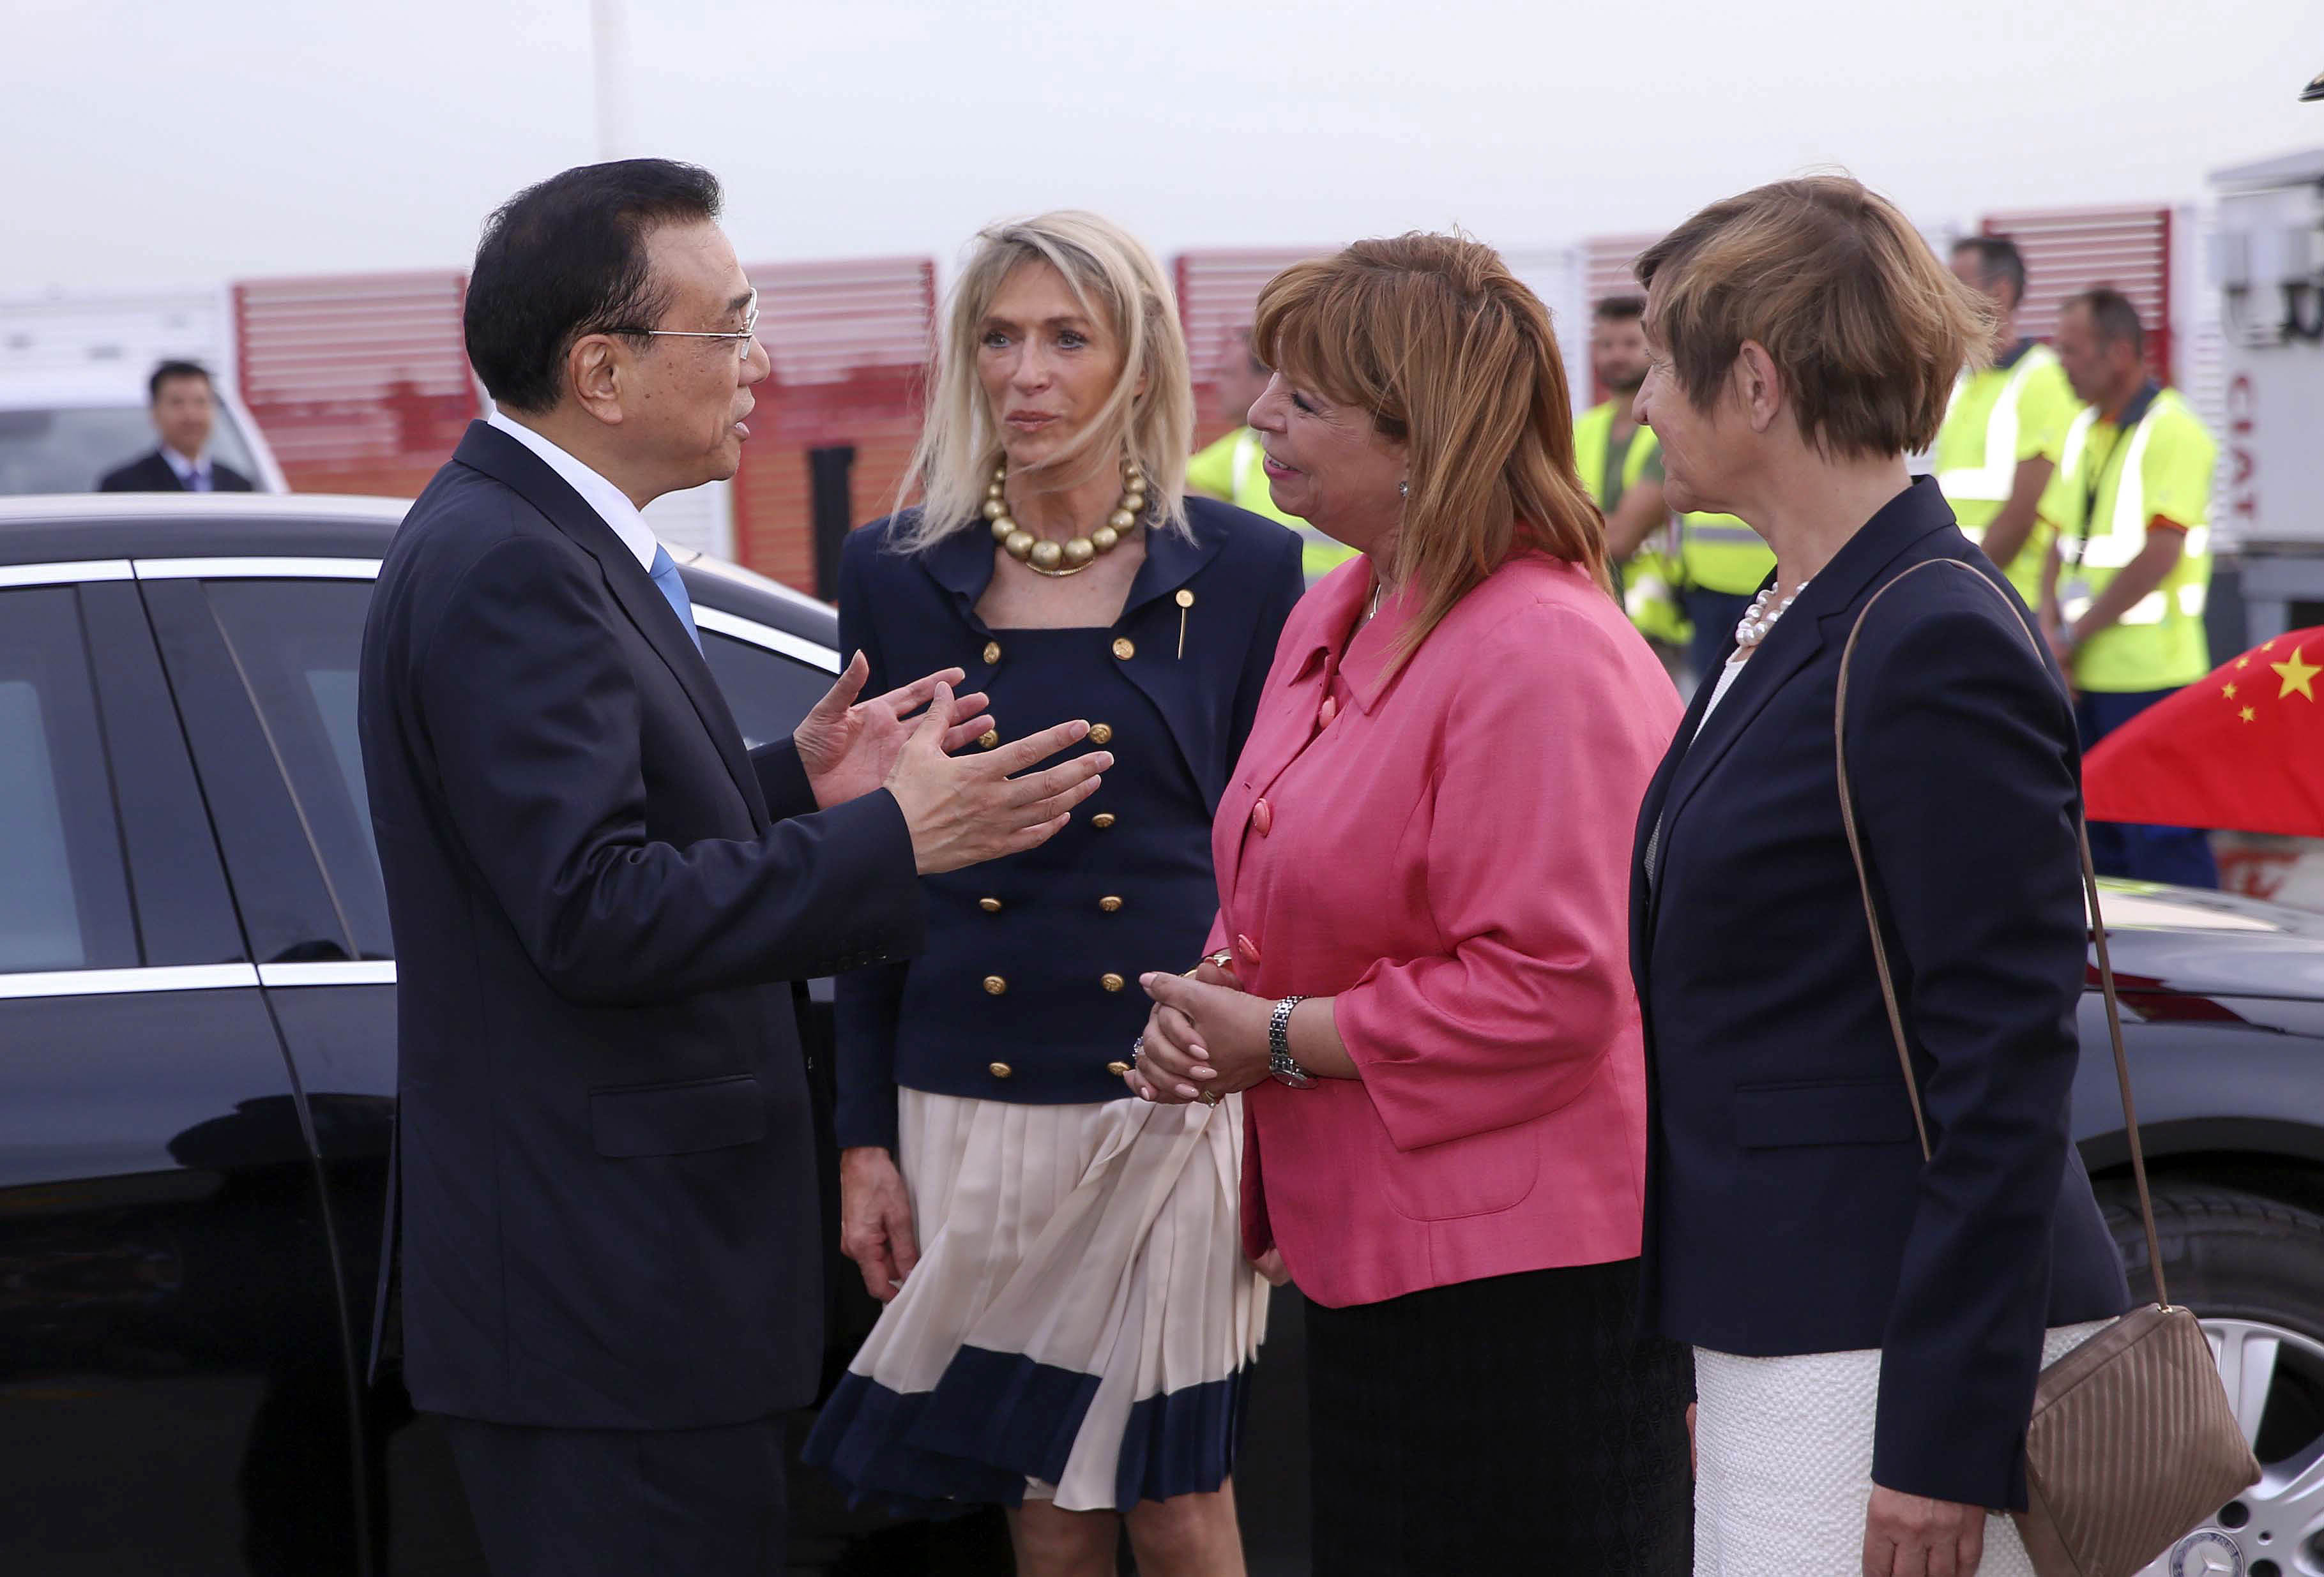 Chinese Premier Li Keqiang talks to senior officials of the EU and Belgium in Brussels before heading back to Beijing, on Friday, June 2, 2017. Premier Li concluded his European tour which involved annual talks with the German Chancellor, Angela Merkel, and attending the 19th China-EU leaders' meeting. [Photo: gov.cn]